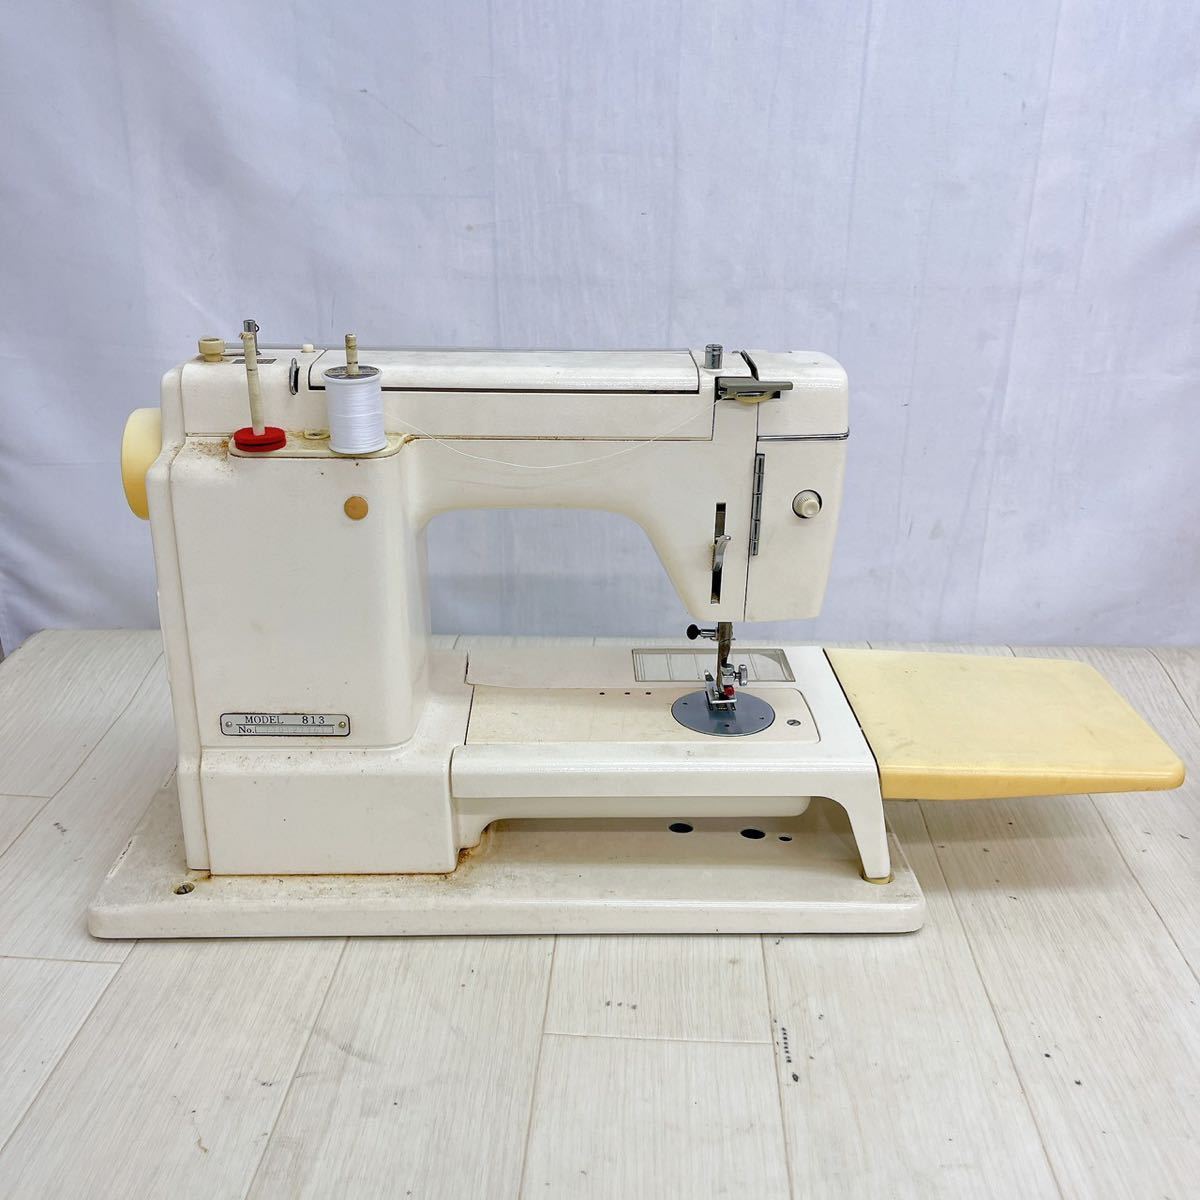 JANOME ジャノメミシン MODEL 813 通電済み-